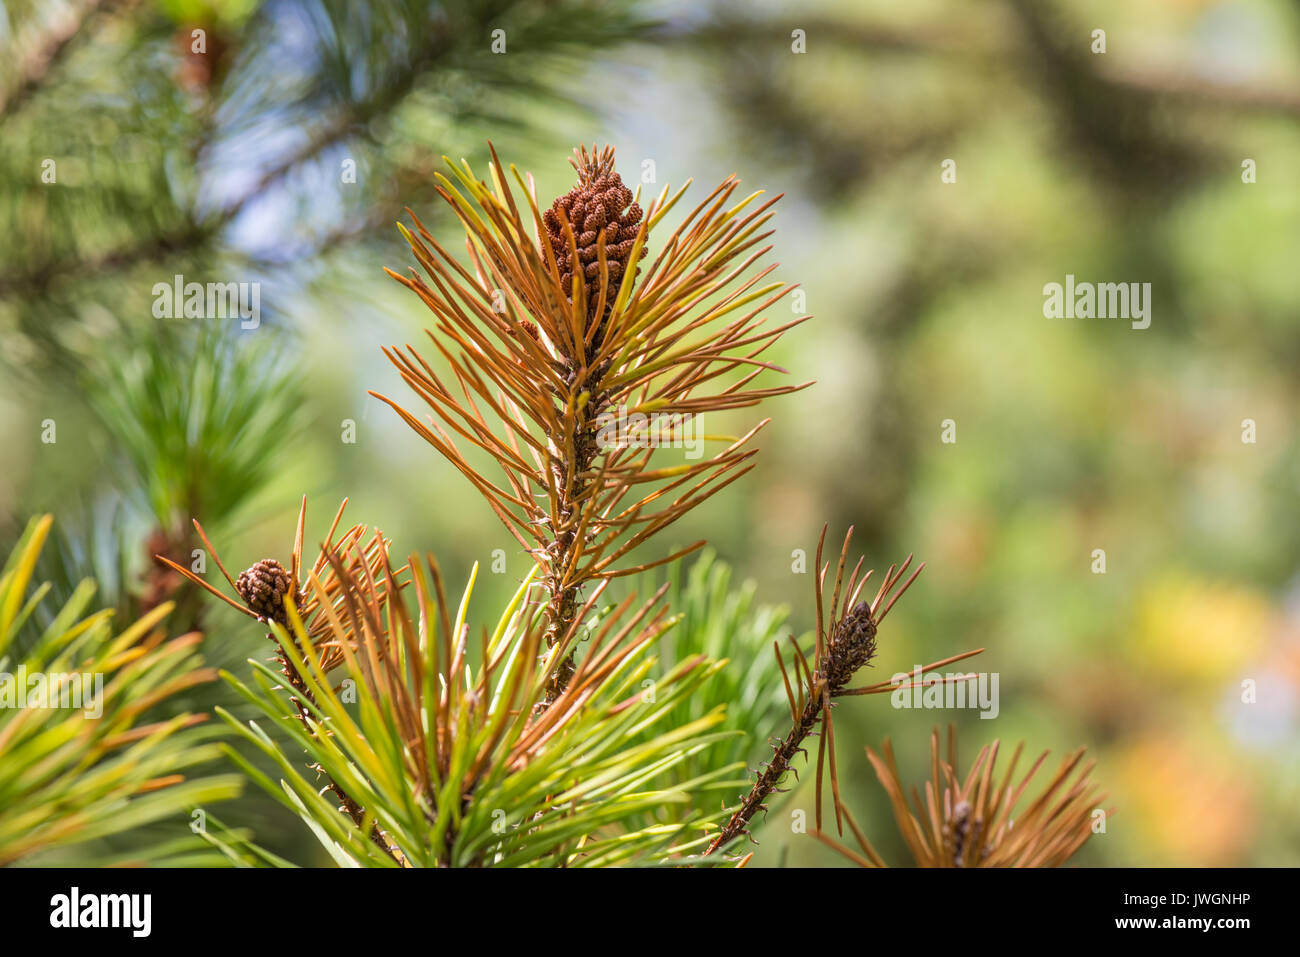 Lodgepole Pine with Male Pollen Flowers. Showing signs of the fungal disease Rhamachloridium, indicated by brown needles on the tips of the shoots. Stock Photo